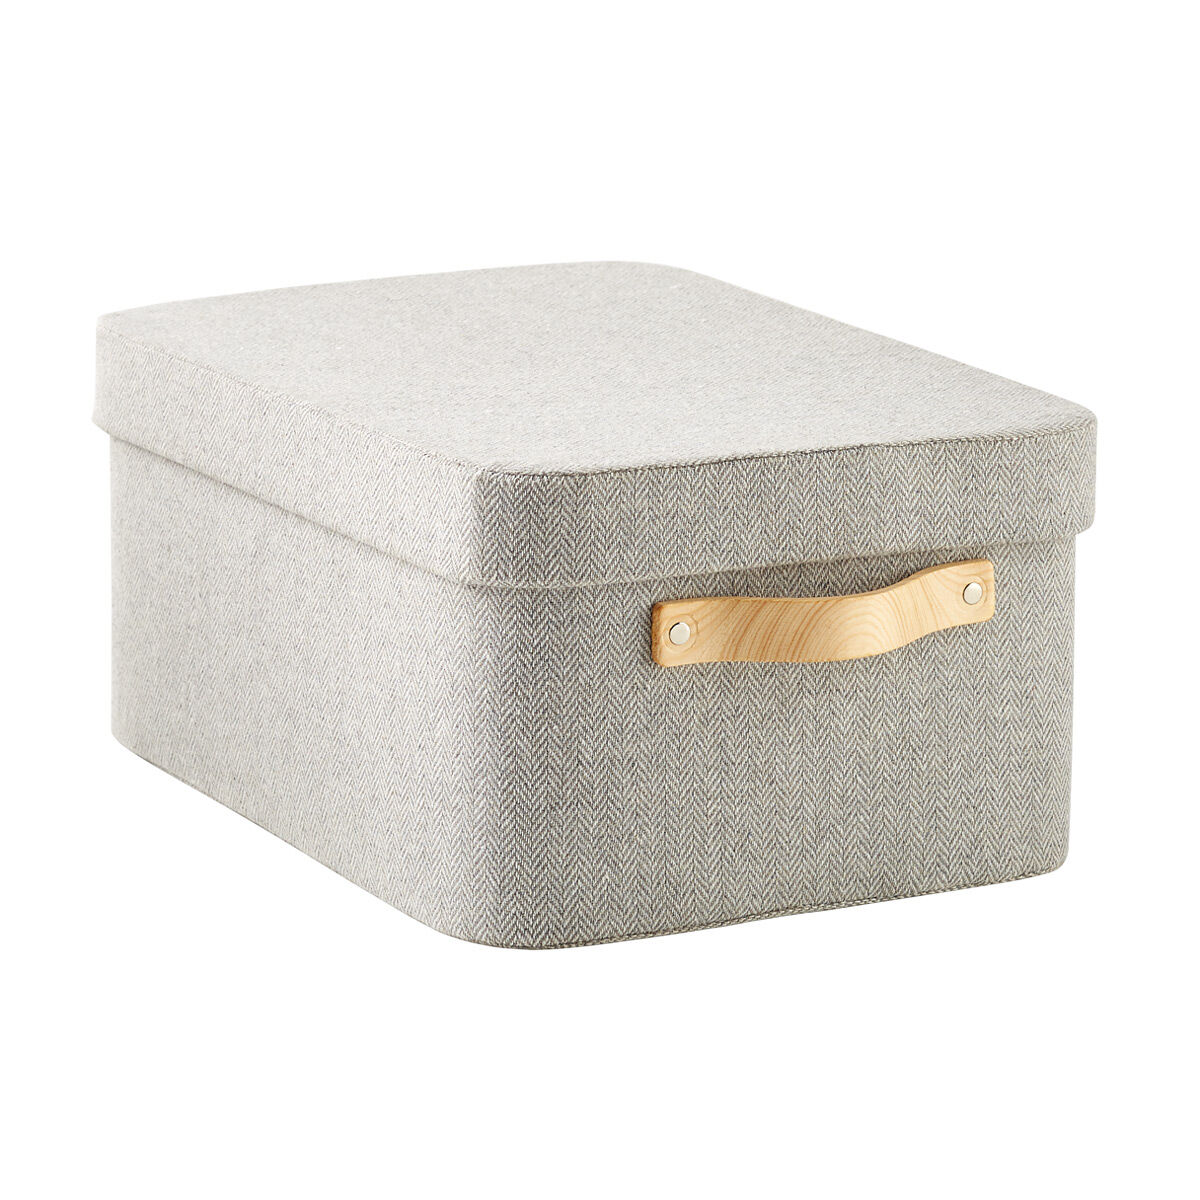 The Container Store Large Herringbone Box w/ Wooden Handles Grey